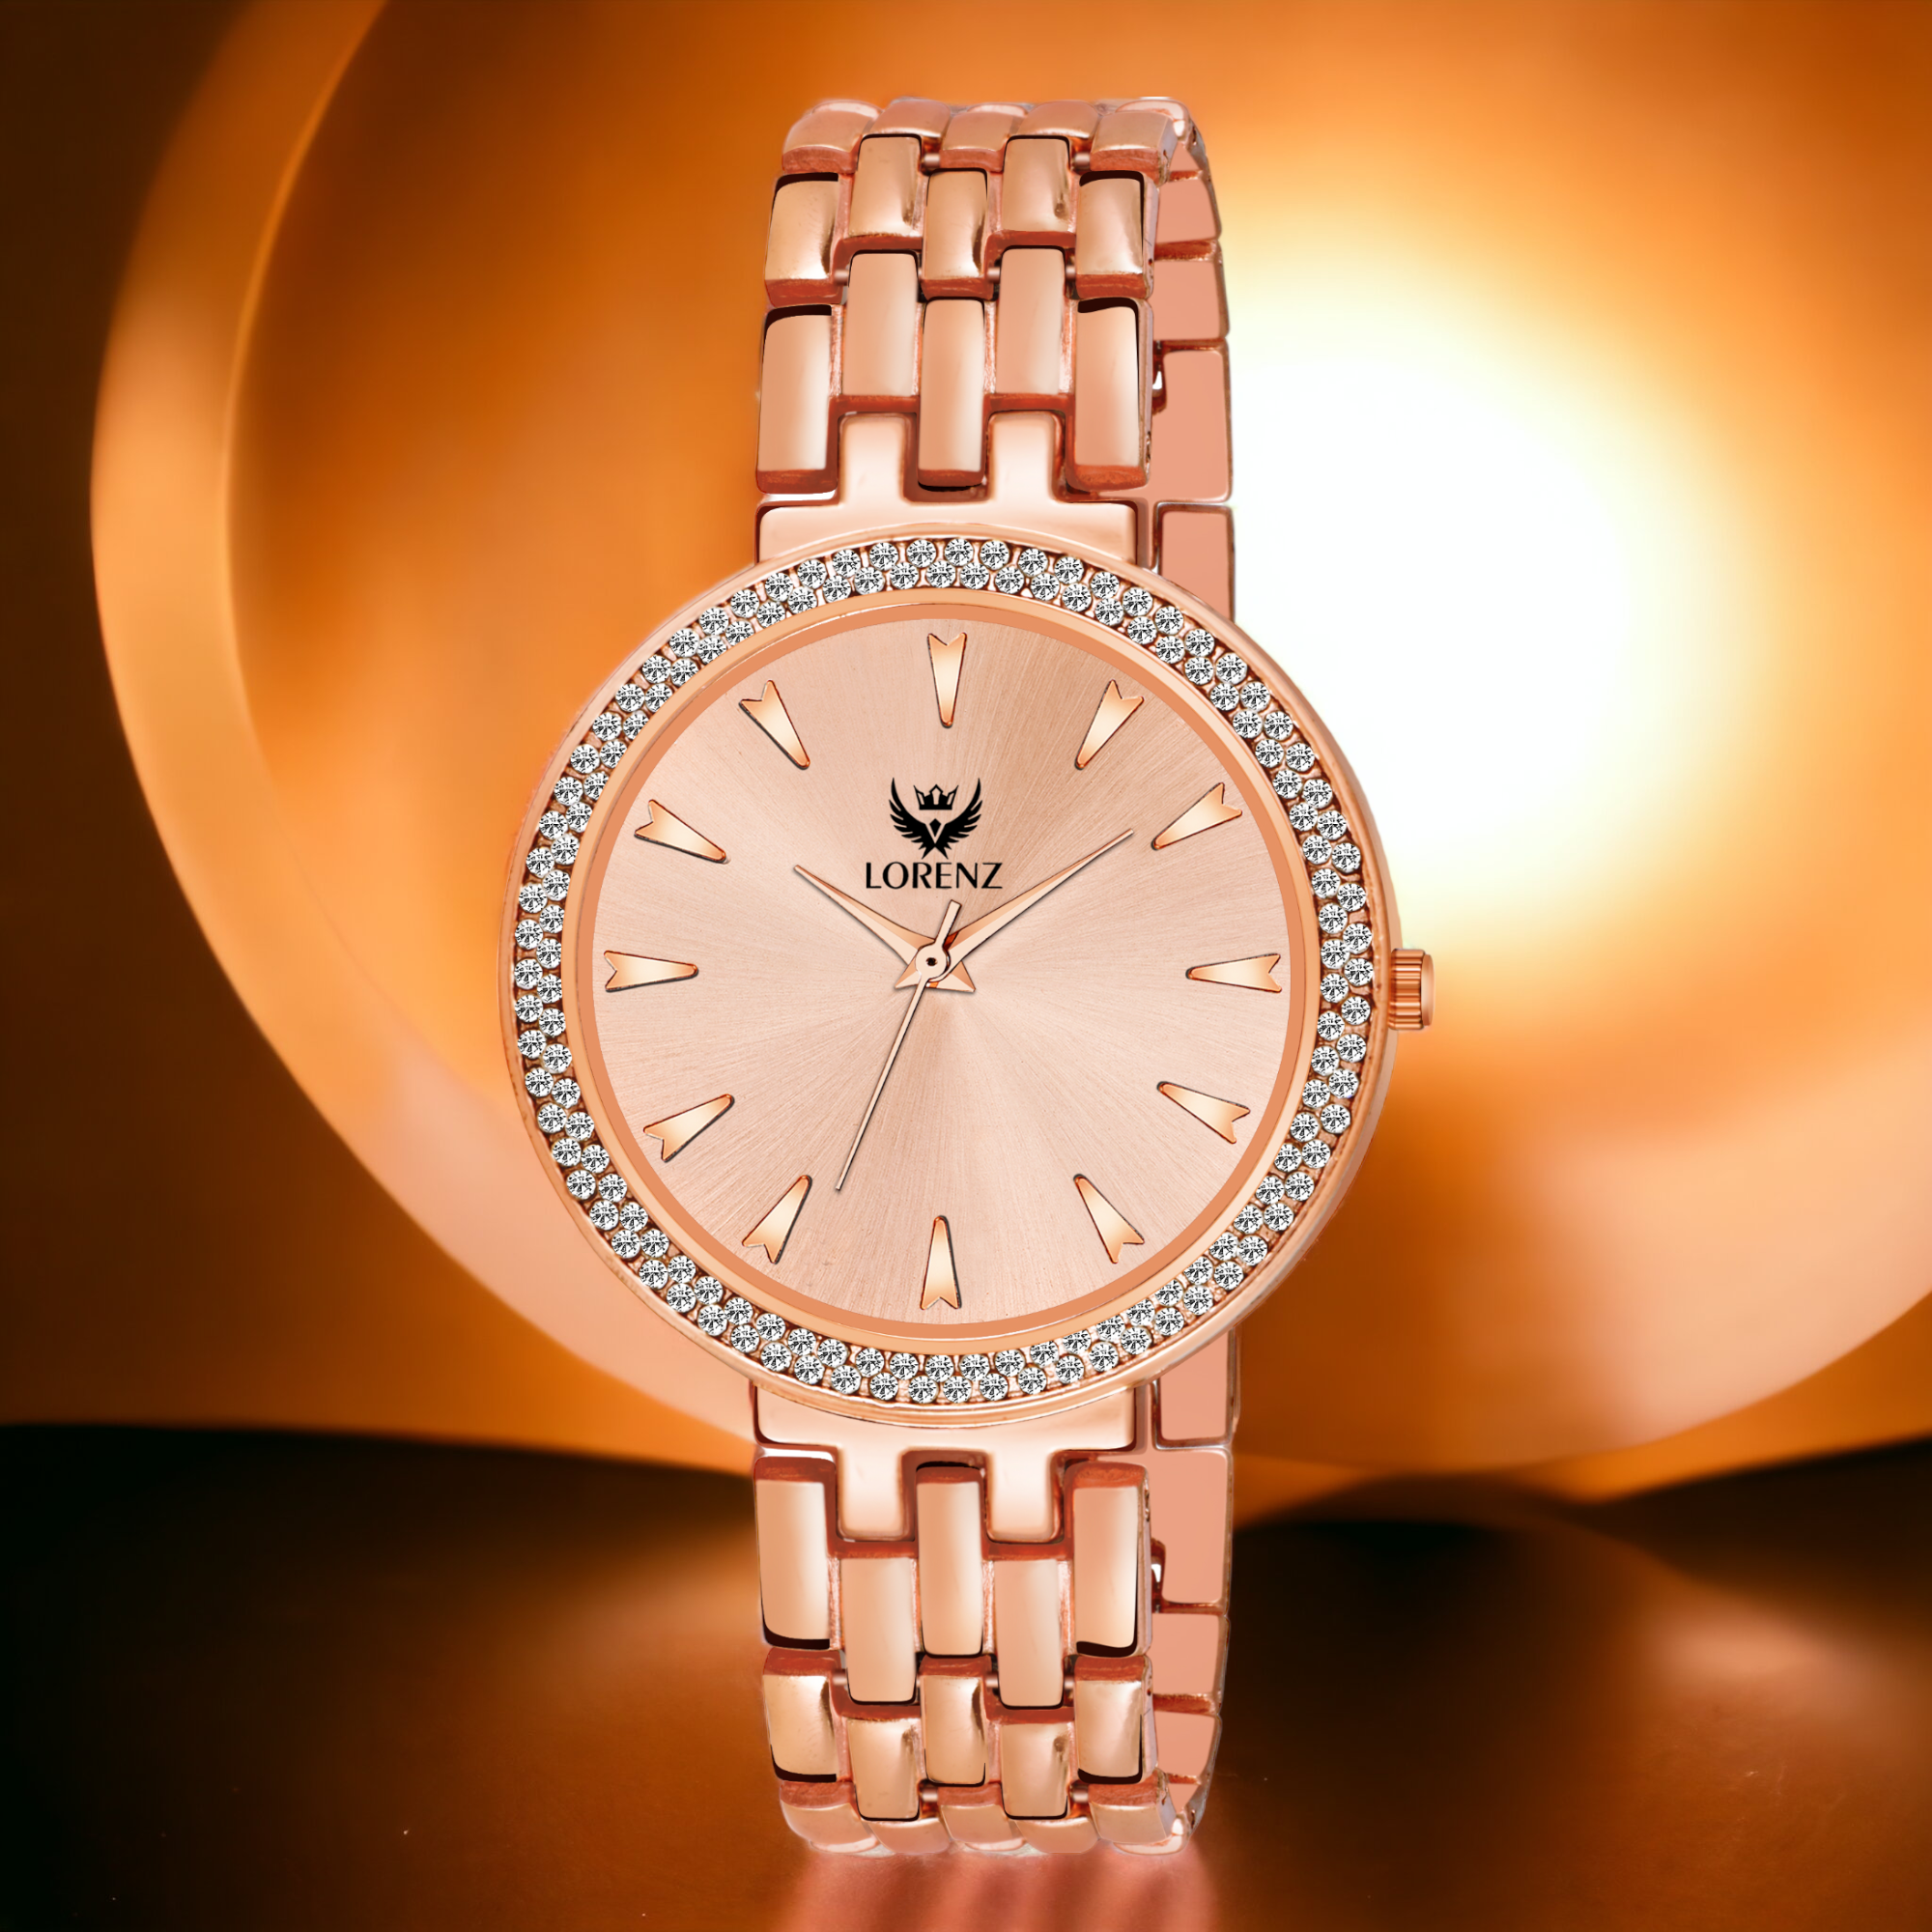 Women's Rose Gold Watch with Stainless Steel Band by Lorenz